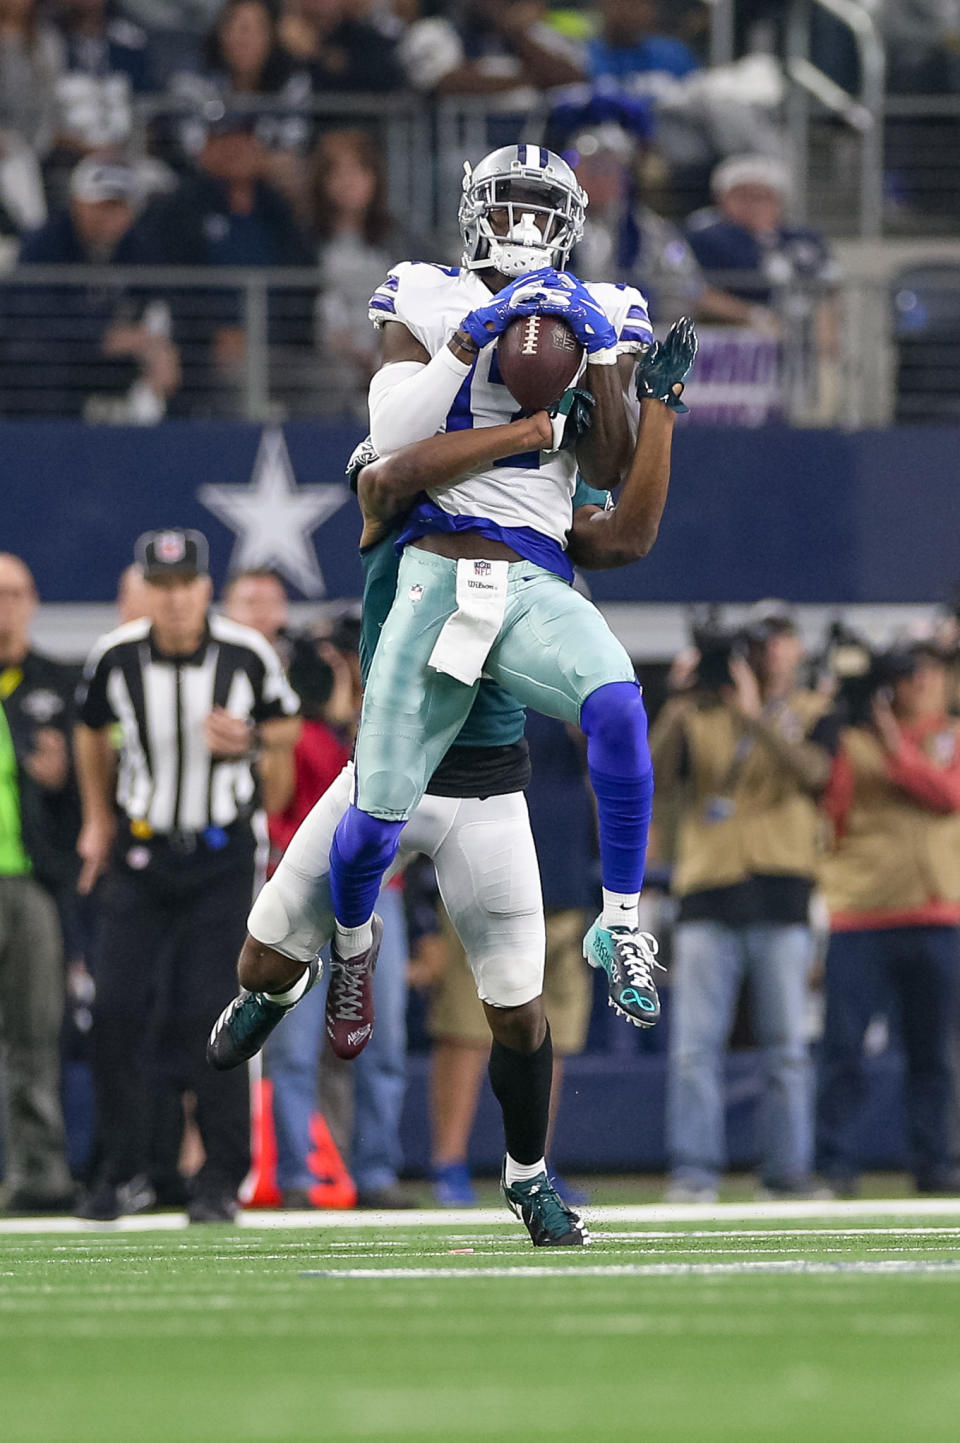 <p>Dallas Cowboys Wide Receiver Allen Hurns (17) makes a reception during the game between the Philadelphia Eagles and Dallas Cowboys on December 9, 2018 at AT&T Stadium in Arlington, TX. (Photo by Andrew Dieb/Icon Sportswire) </p>